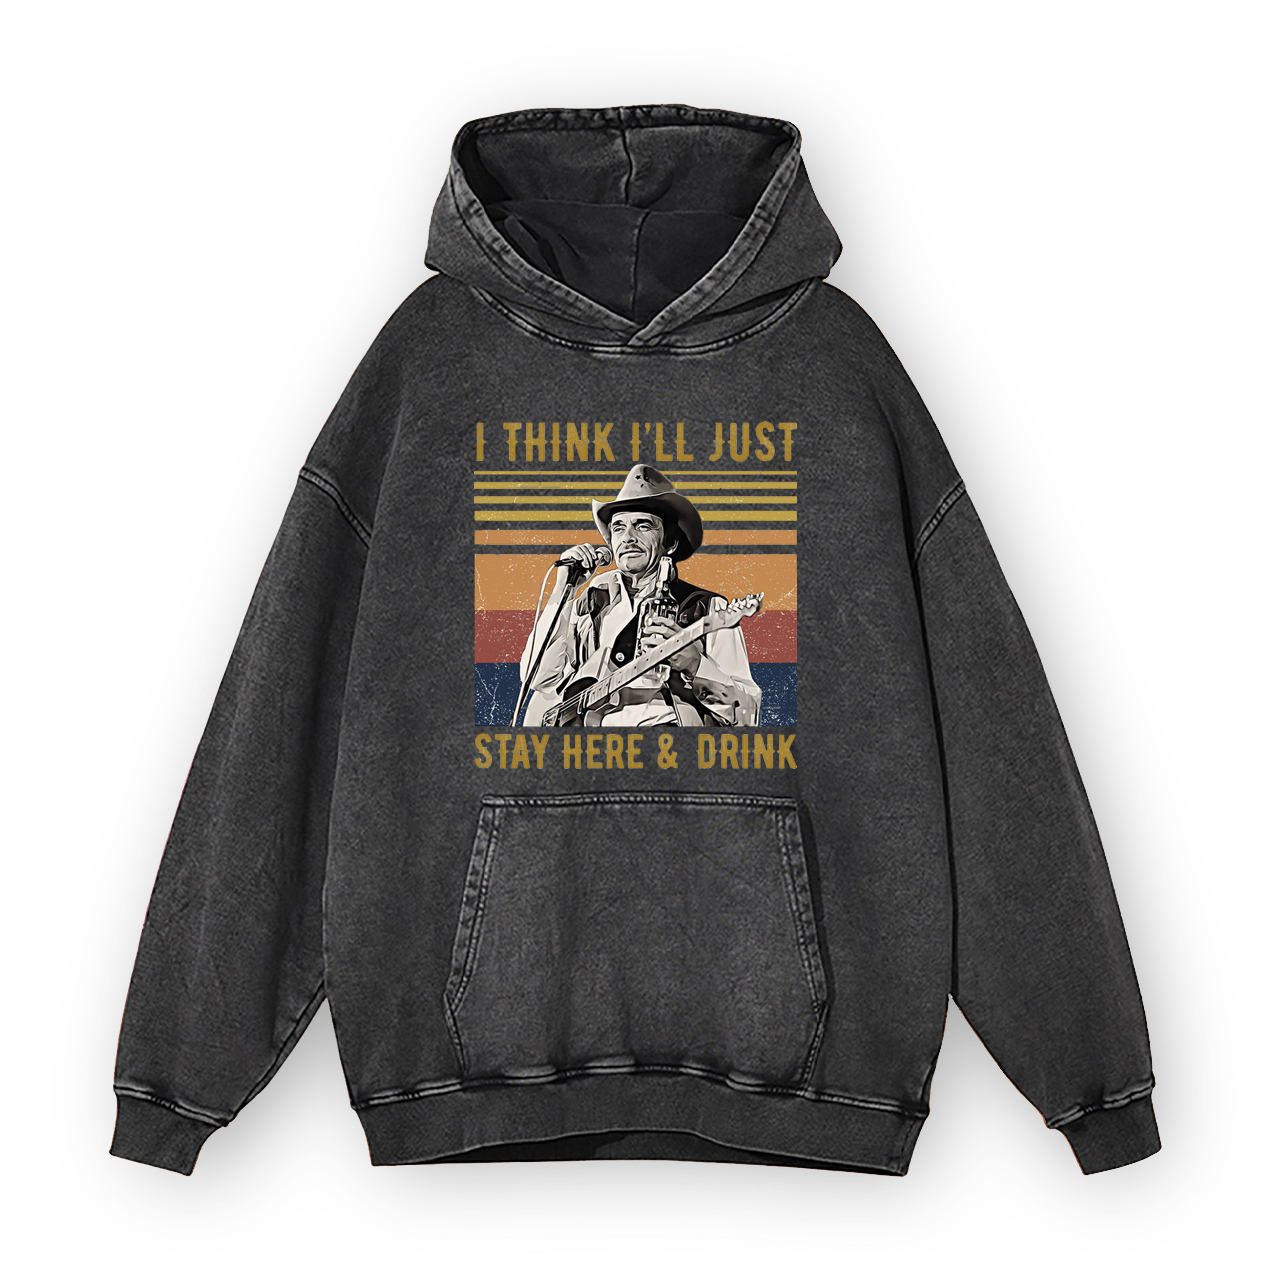 Merle Haggard Think I'll Just Stay Here And Drink Garment-Dye Hoodies